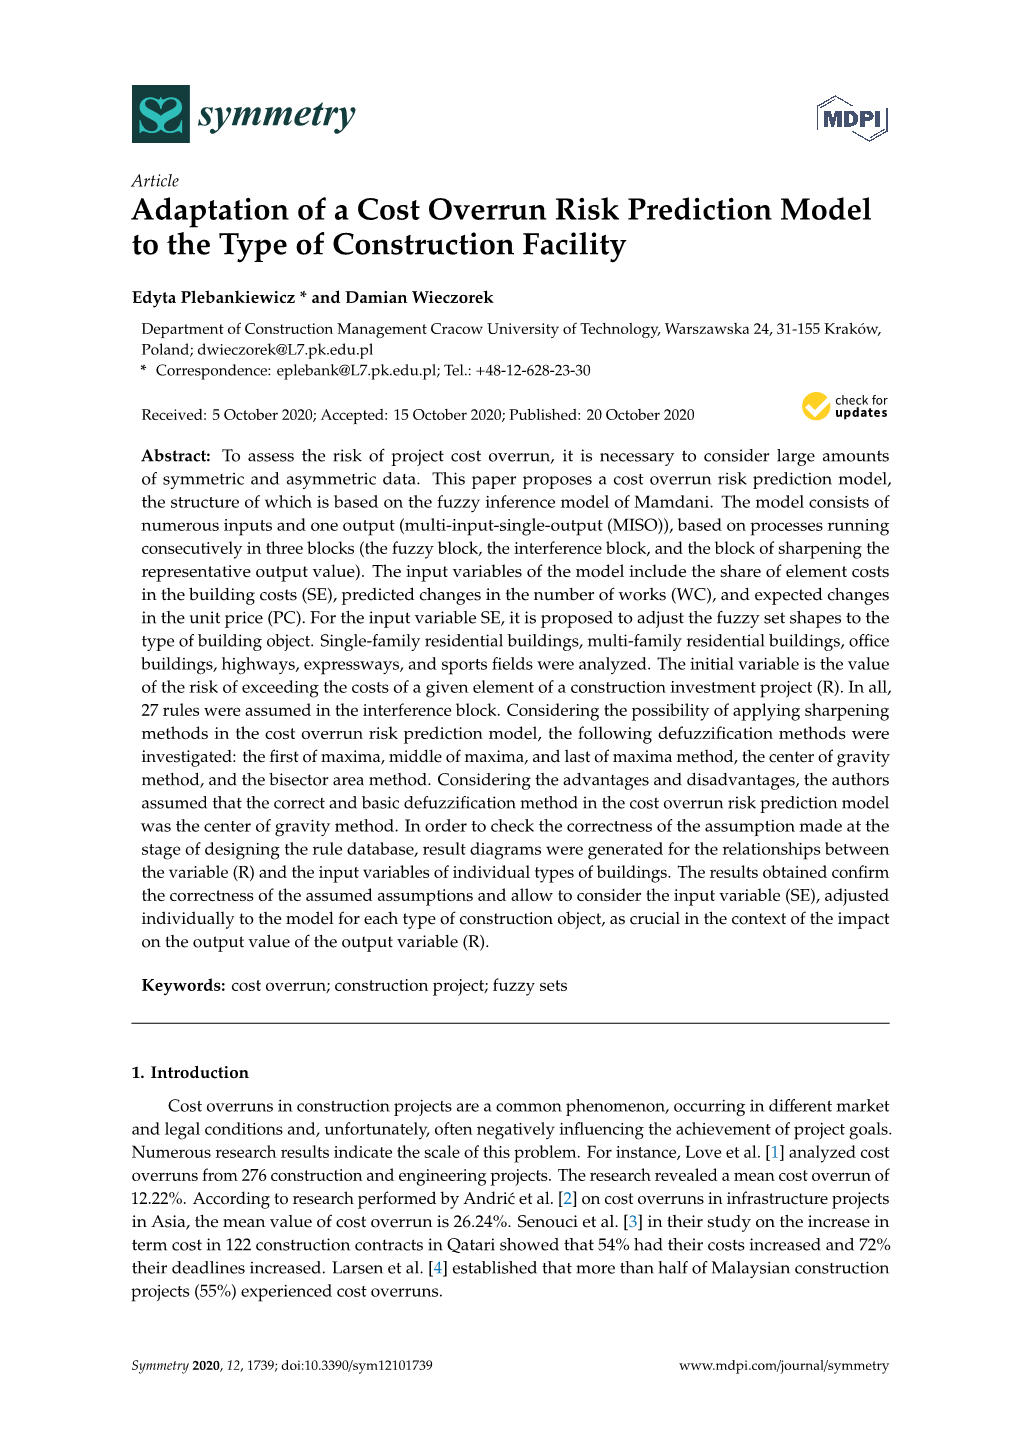 Adaptation of a Cost Overrun Risk Prediction Model to the Type of Construction Facility